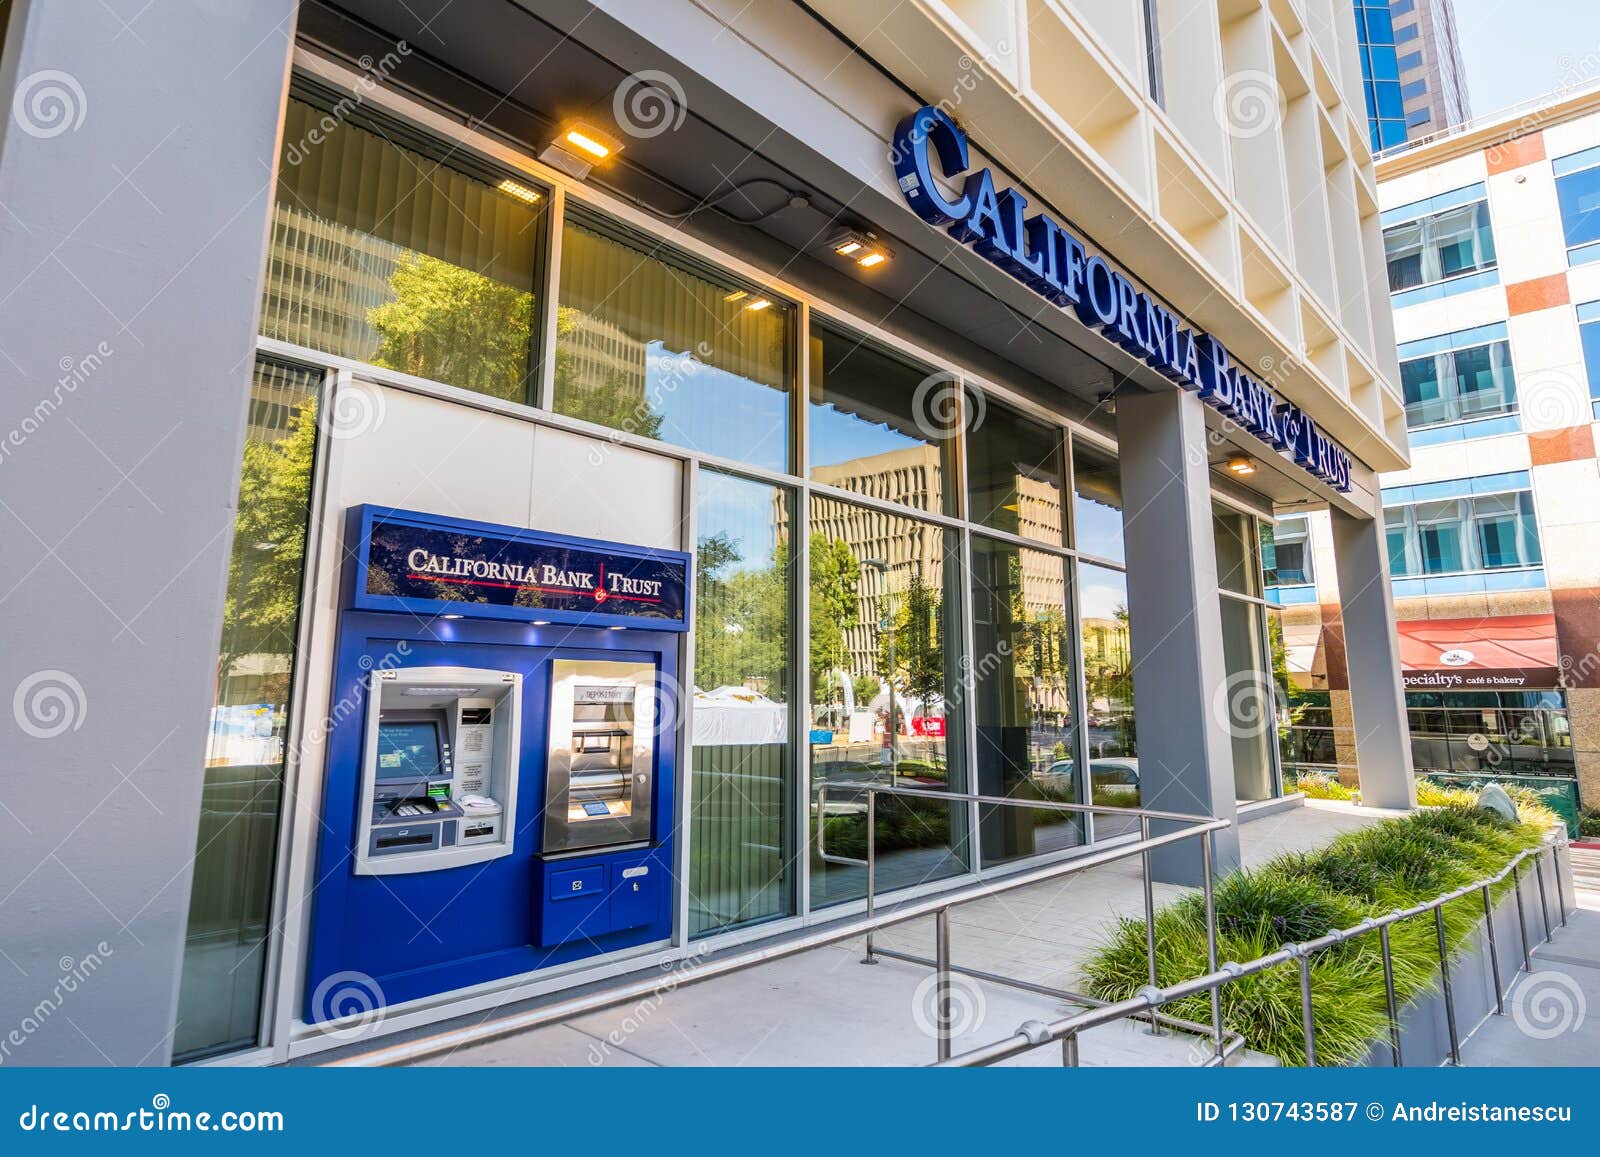 California Bank & Trust Branch Editorial Photography - Image of branch ...